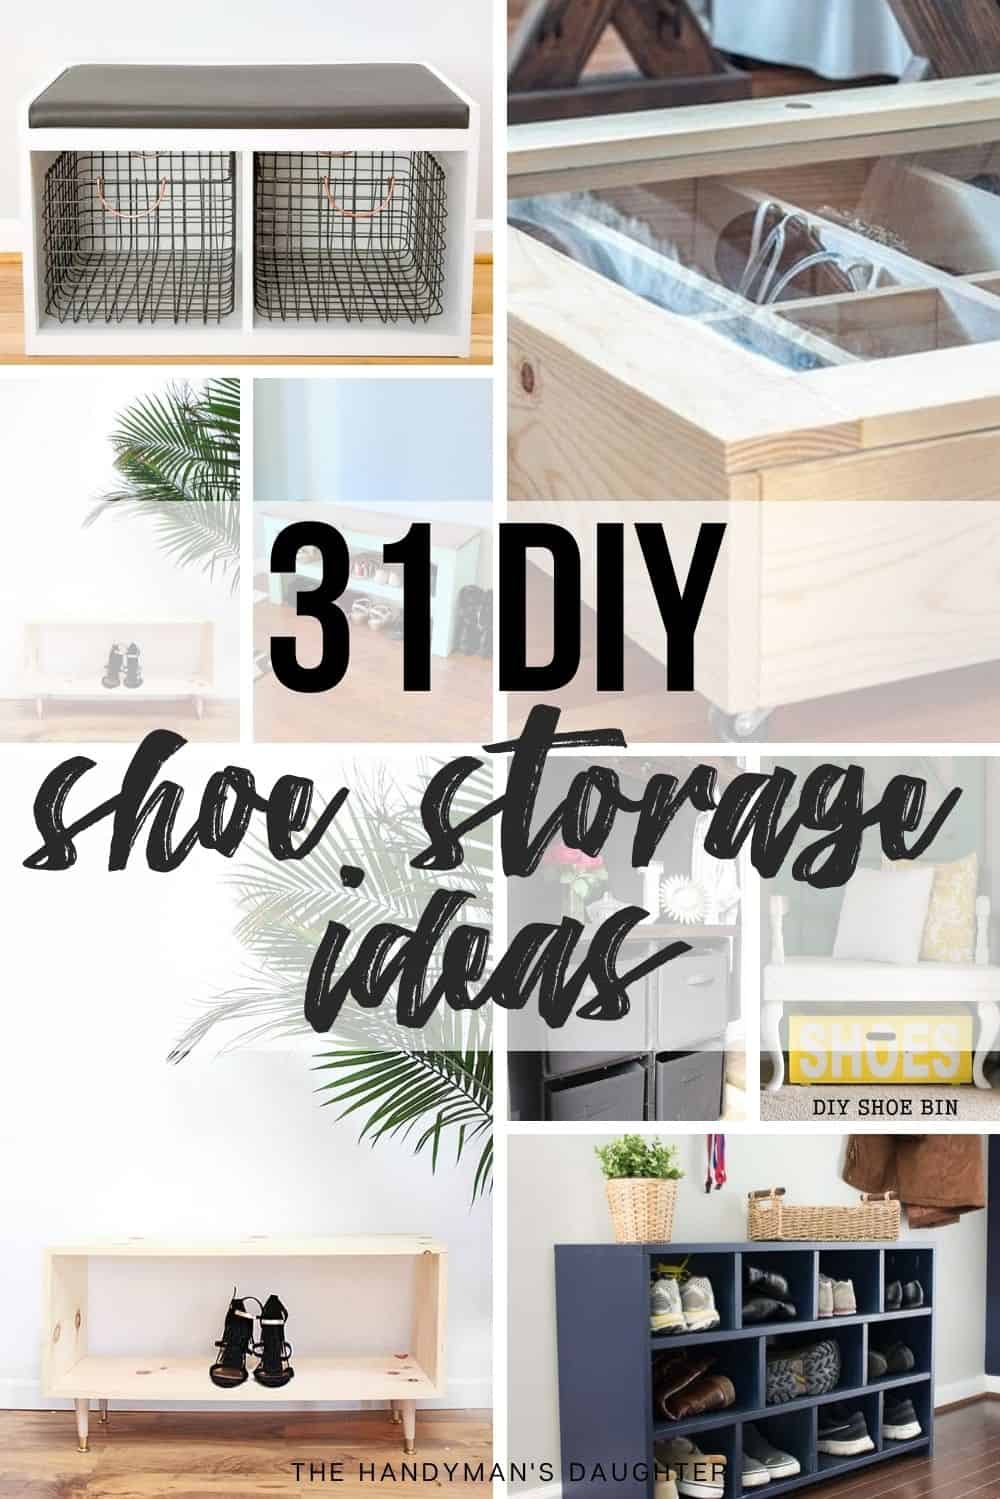 31 DIY shoe storage ideas collage with text overlay